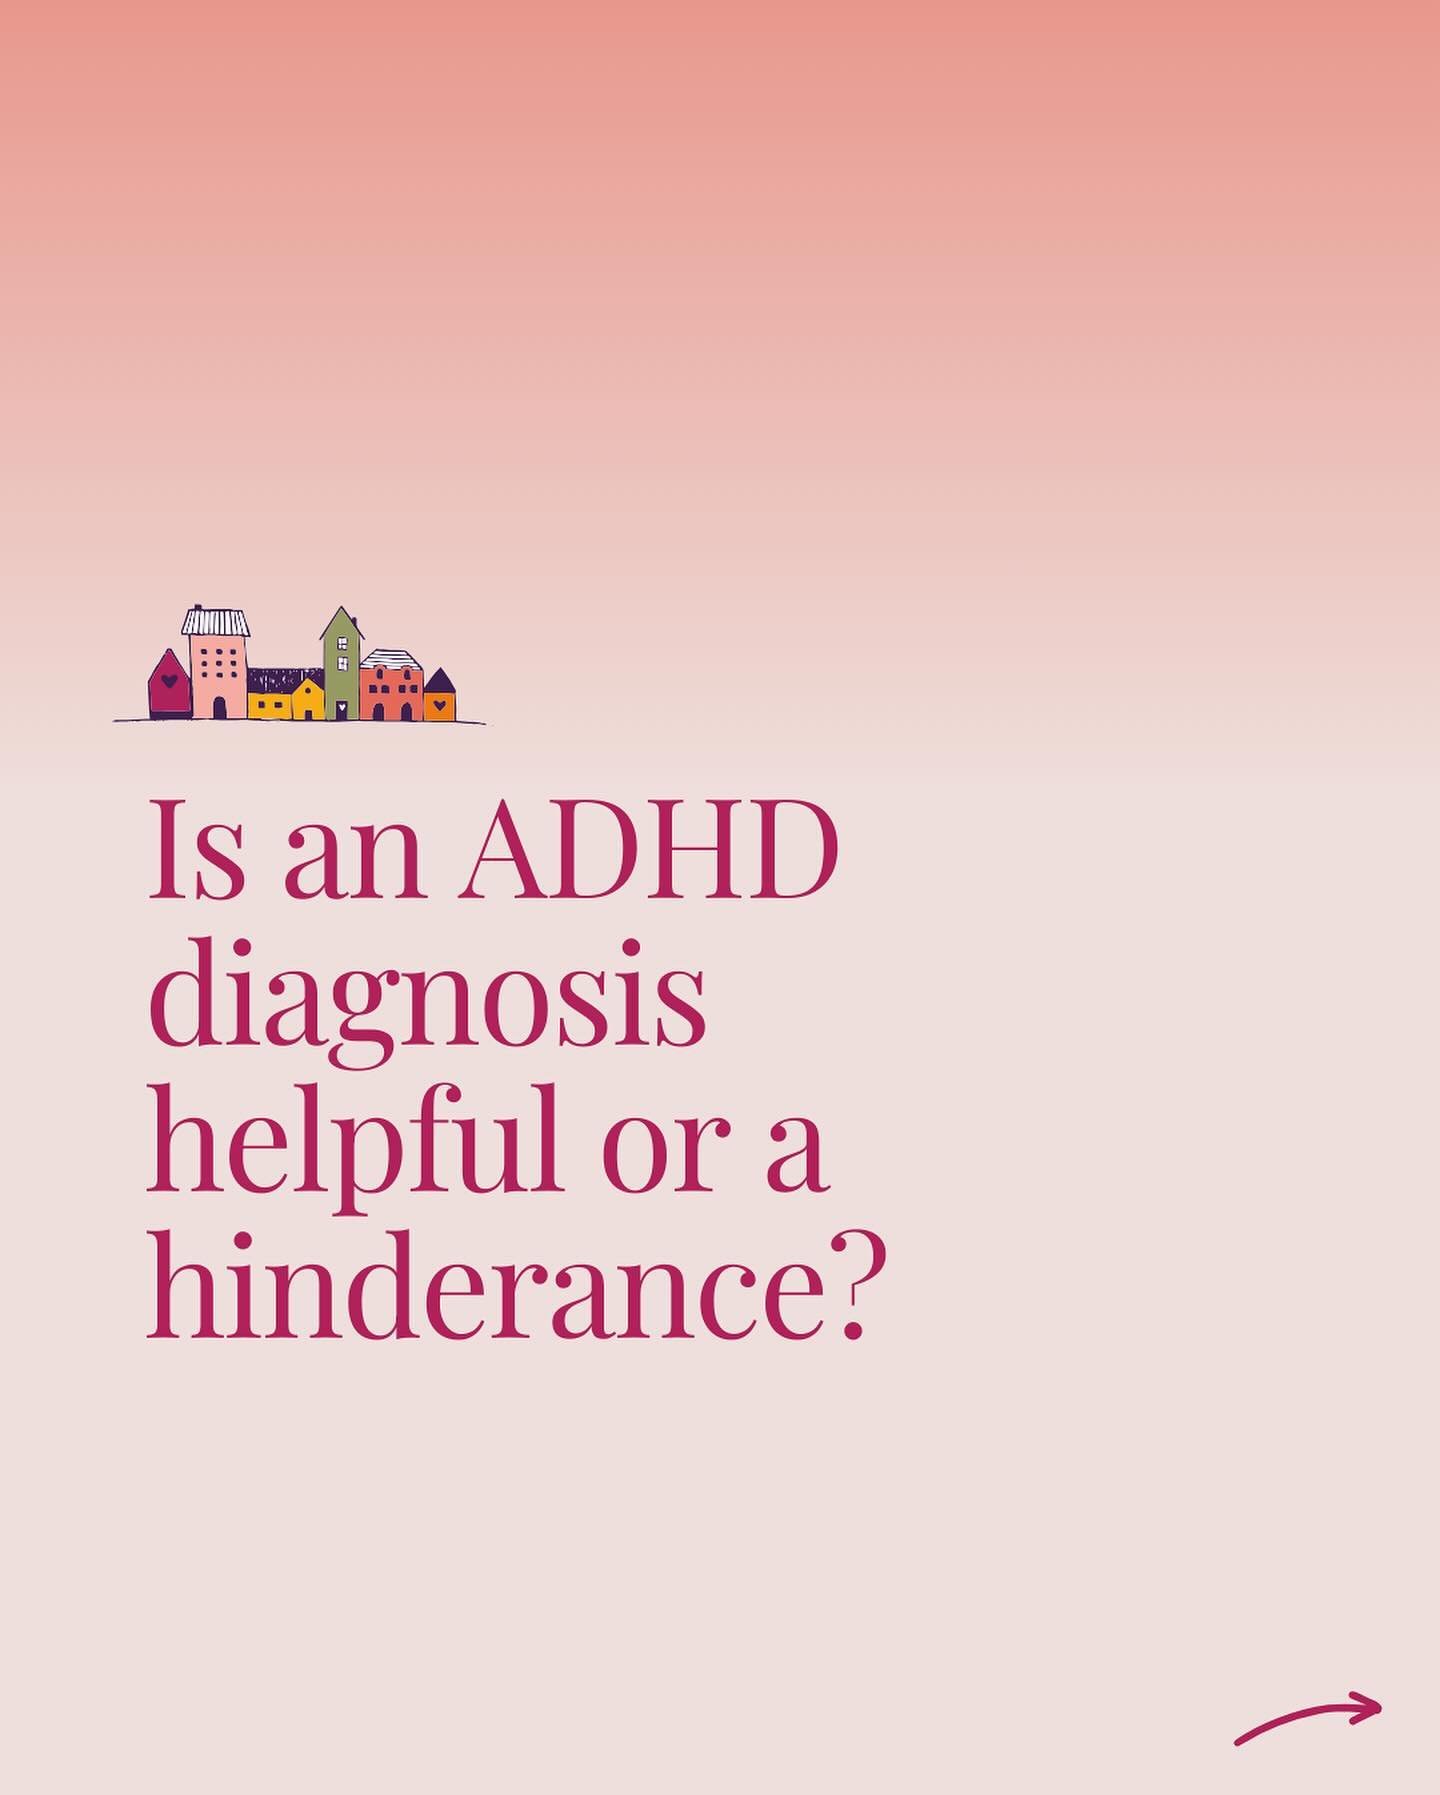 Understanding and addressing ADHD early can make a world of difference in your child&rsquo;s development. 

From recognising signs to exploring practical strategies m, knowledge truly is power. 

Read the full blog on our website to learn how to supp